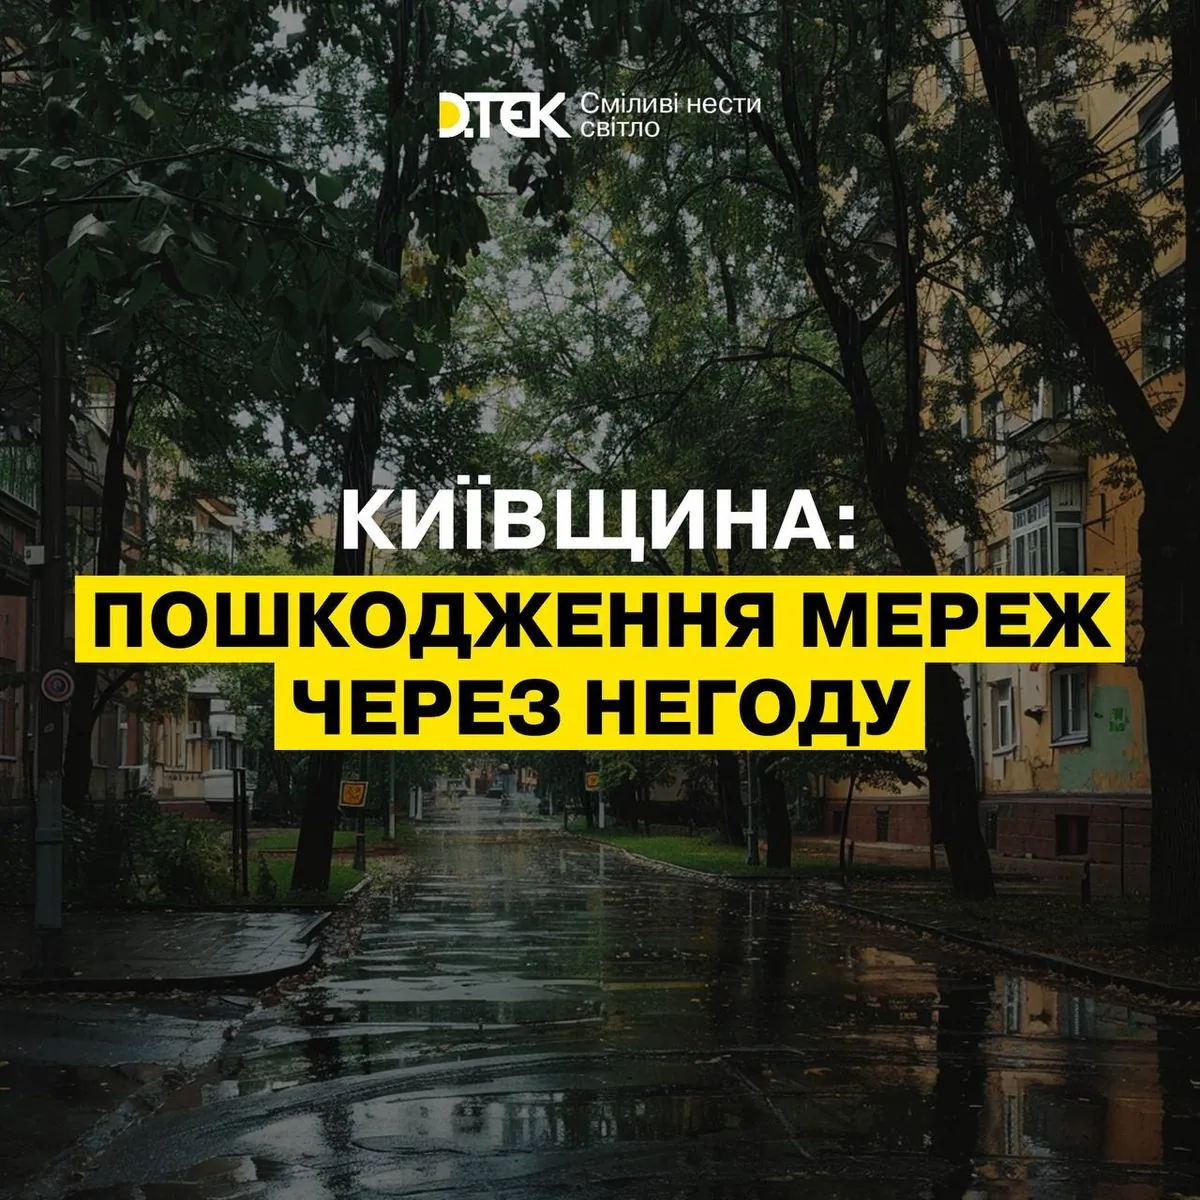 Thunderstorm caused emergency power outages in Kyiv region: what is known